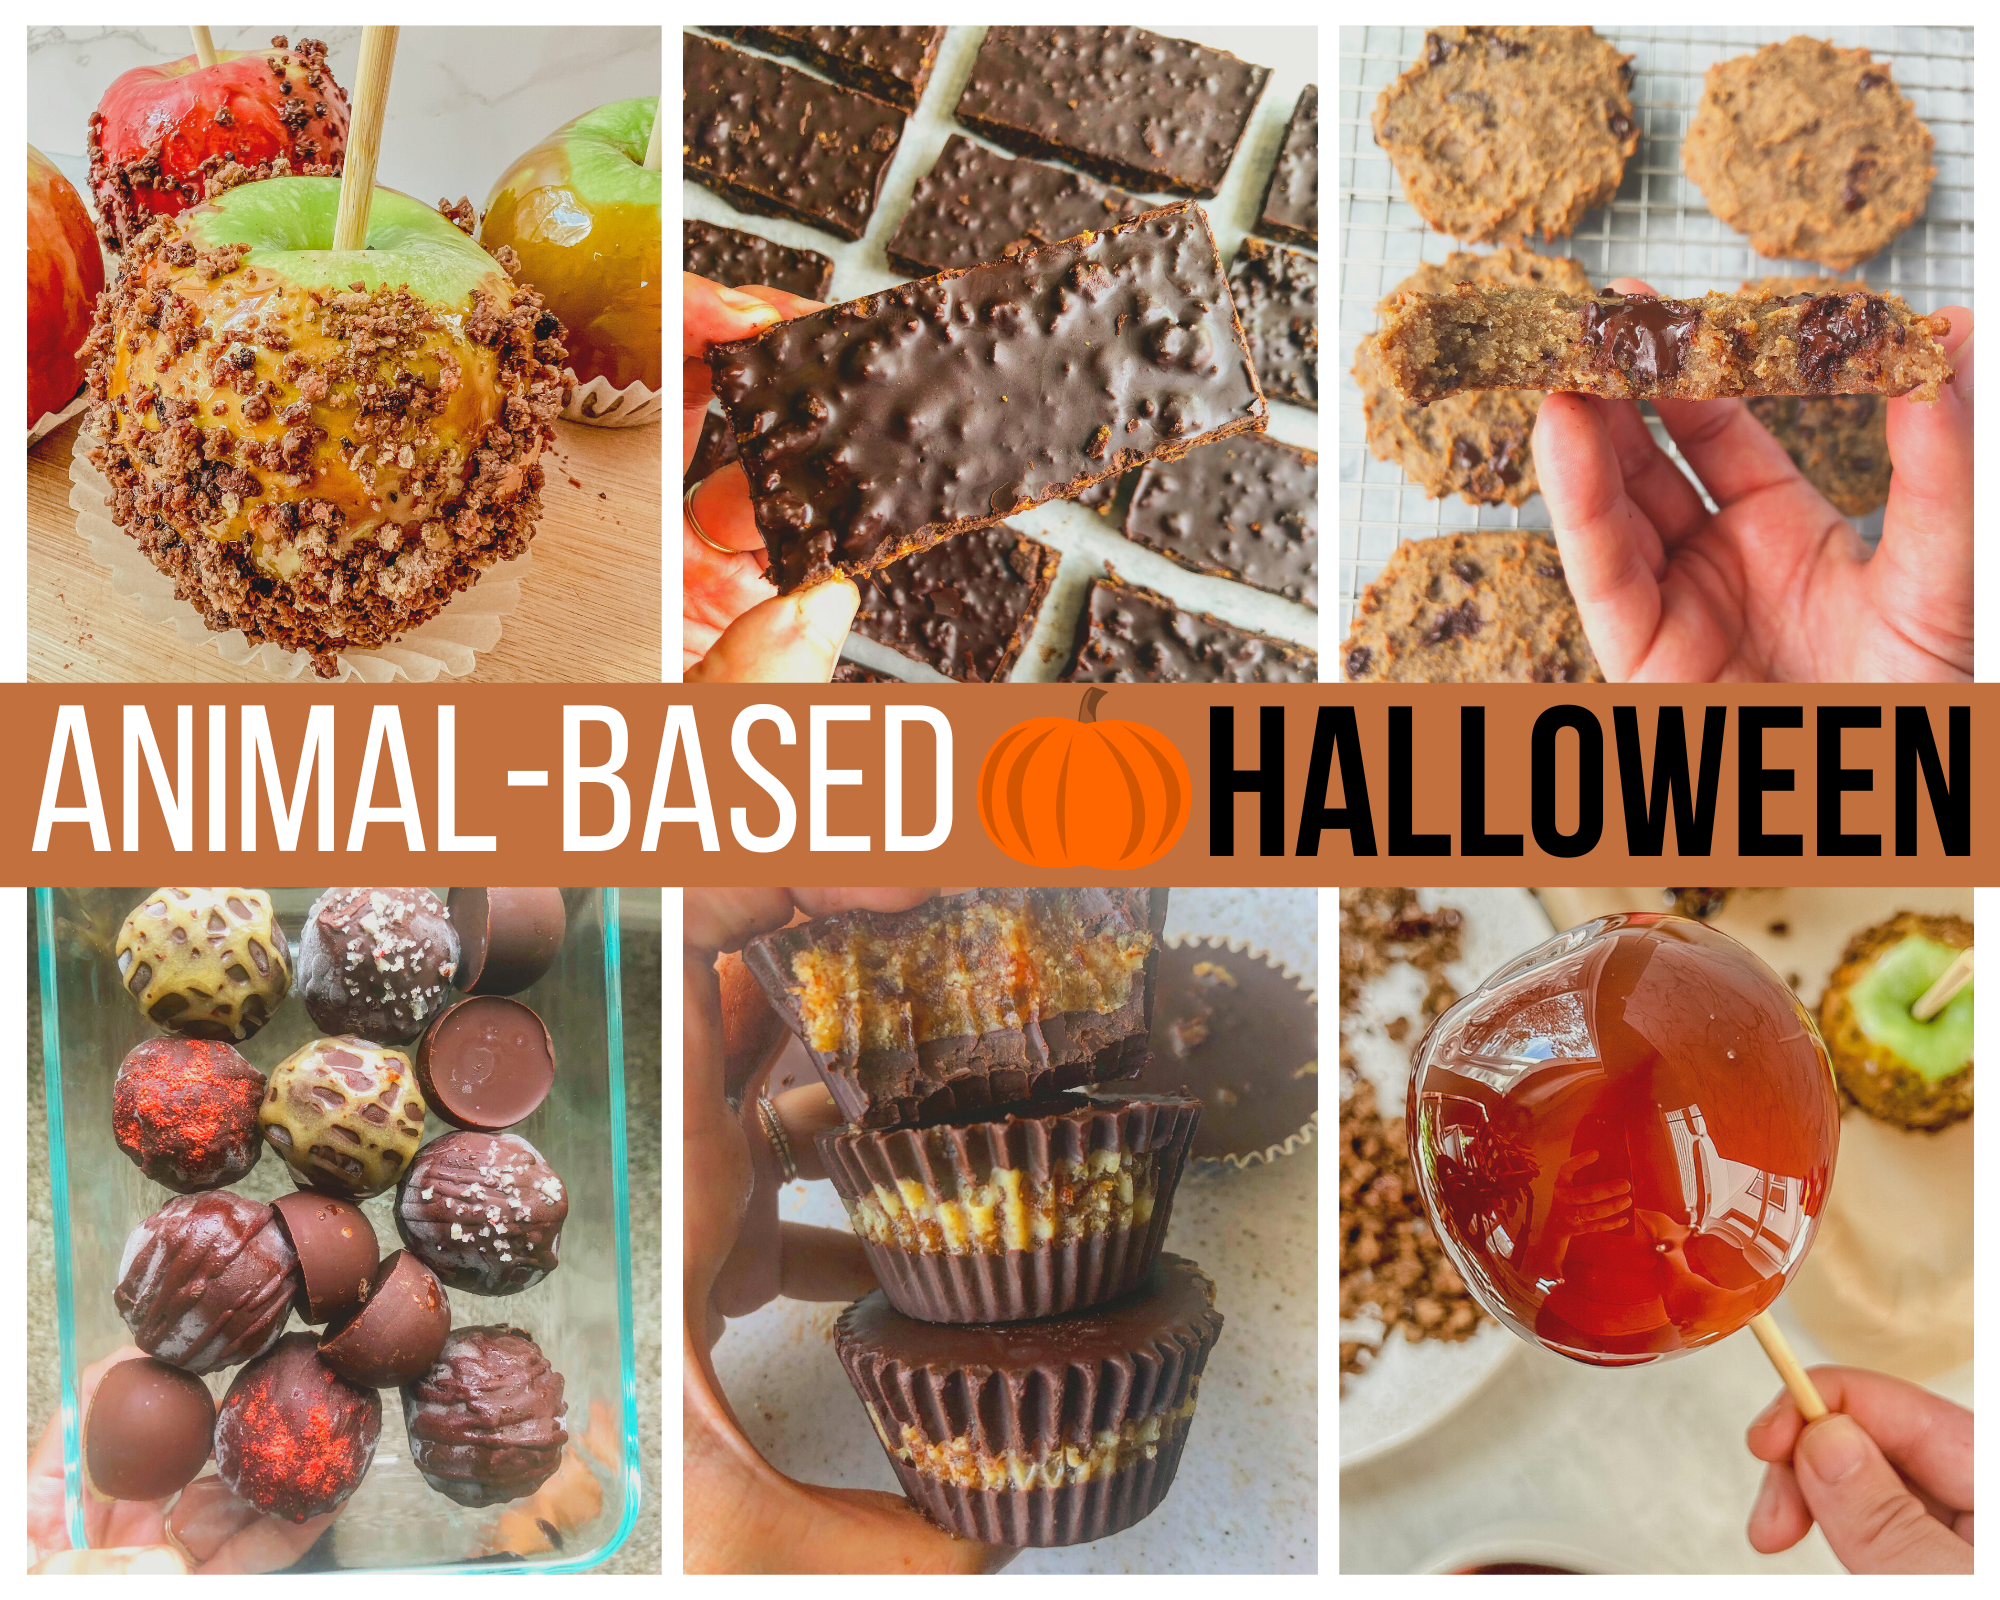 animal-based recipes for halloween